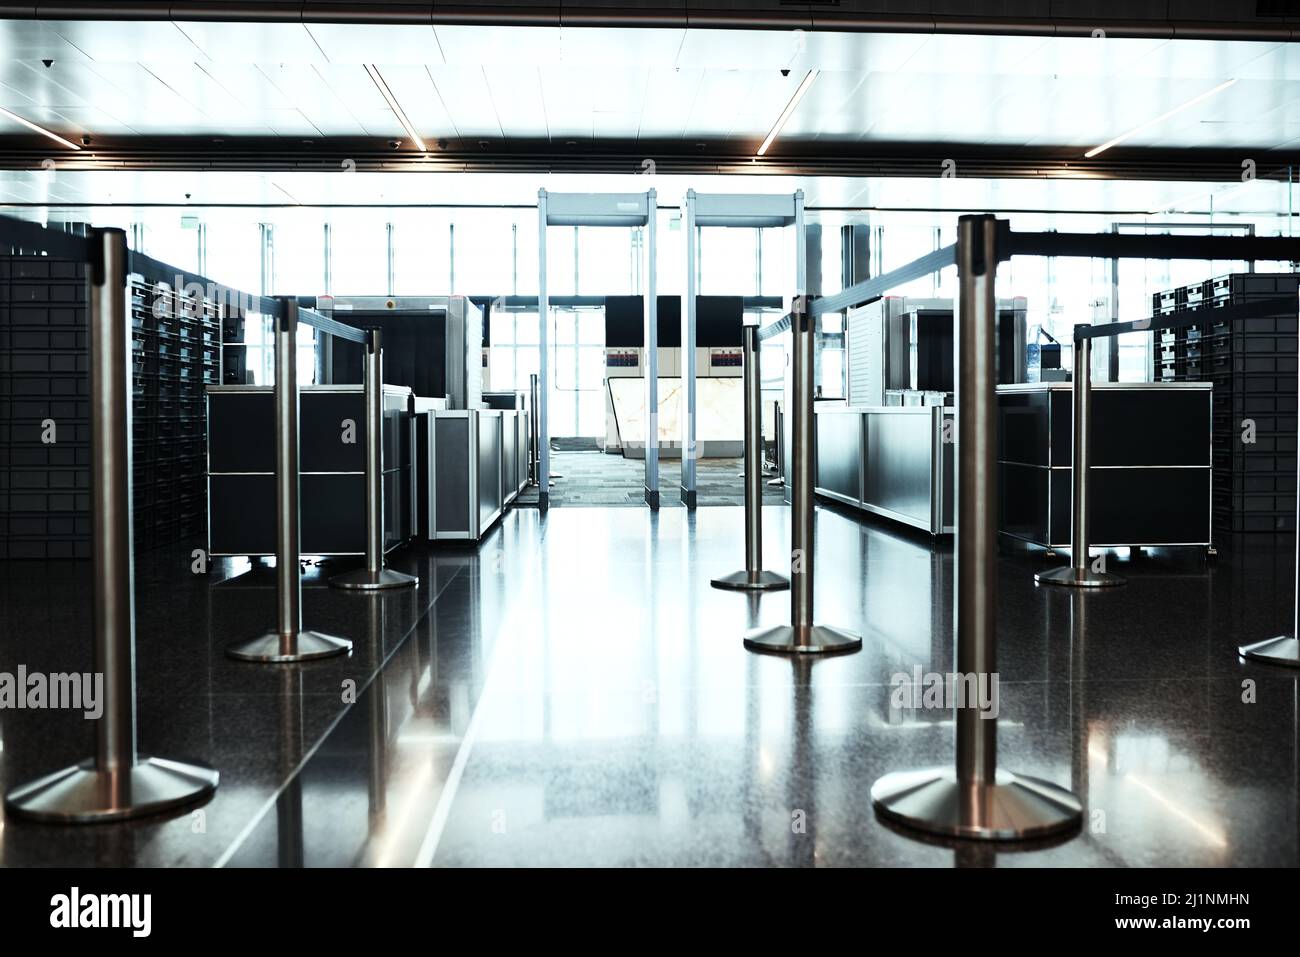 Your boarding gate. Shot of the inside of an airport. Stock Photo